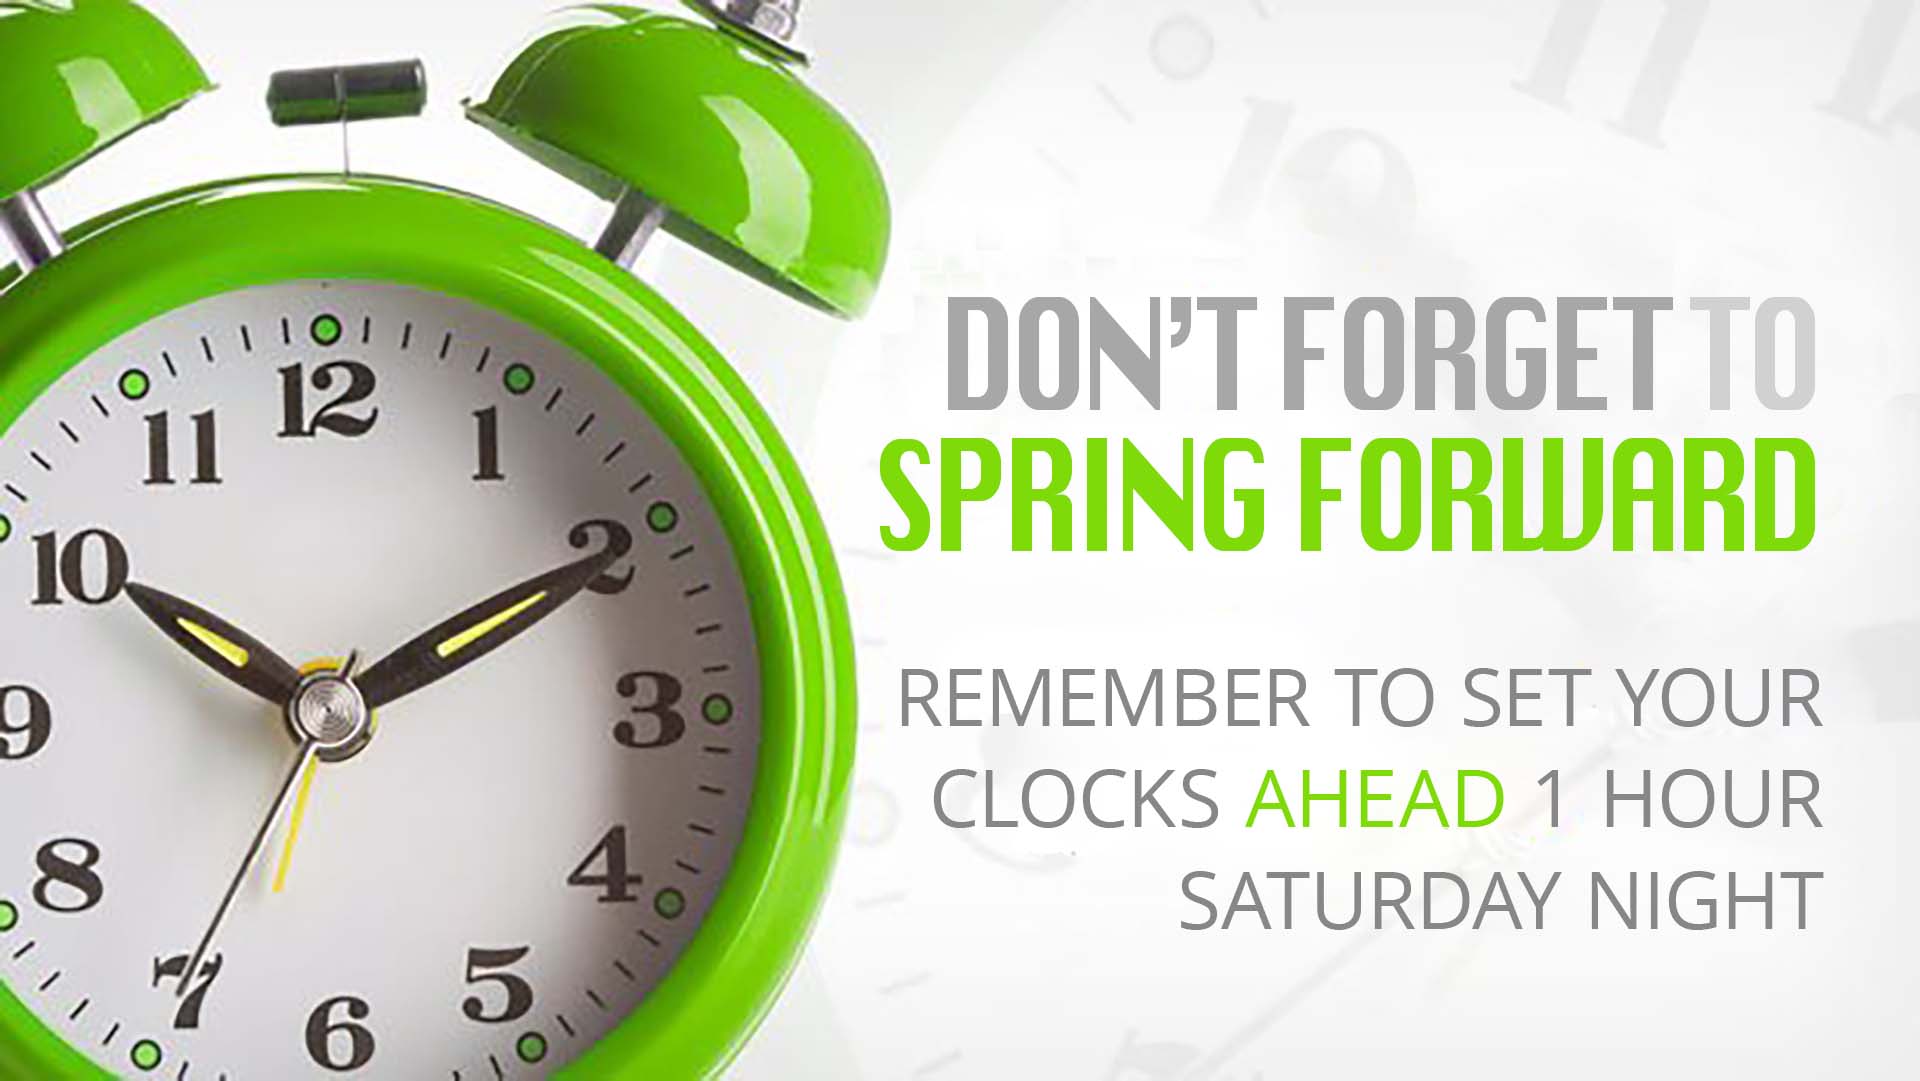 Green clock on the left side of the screen. On the right side of the graphic it says, "Don't Forget to Spring Forward Remember to set your clocks AHEAD 1 hour Saturday night."